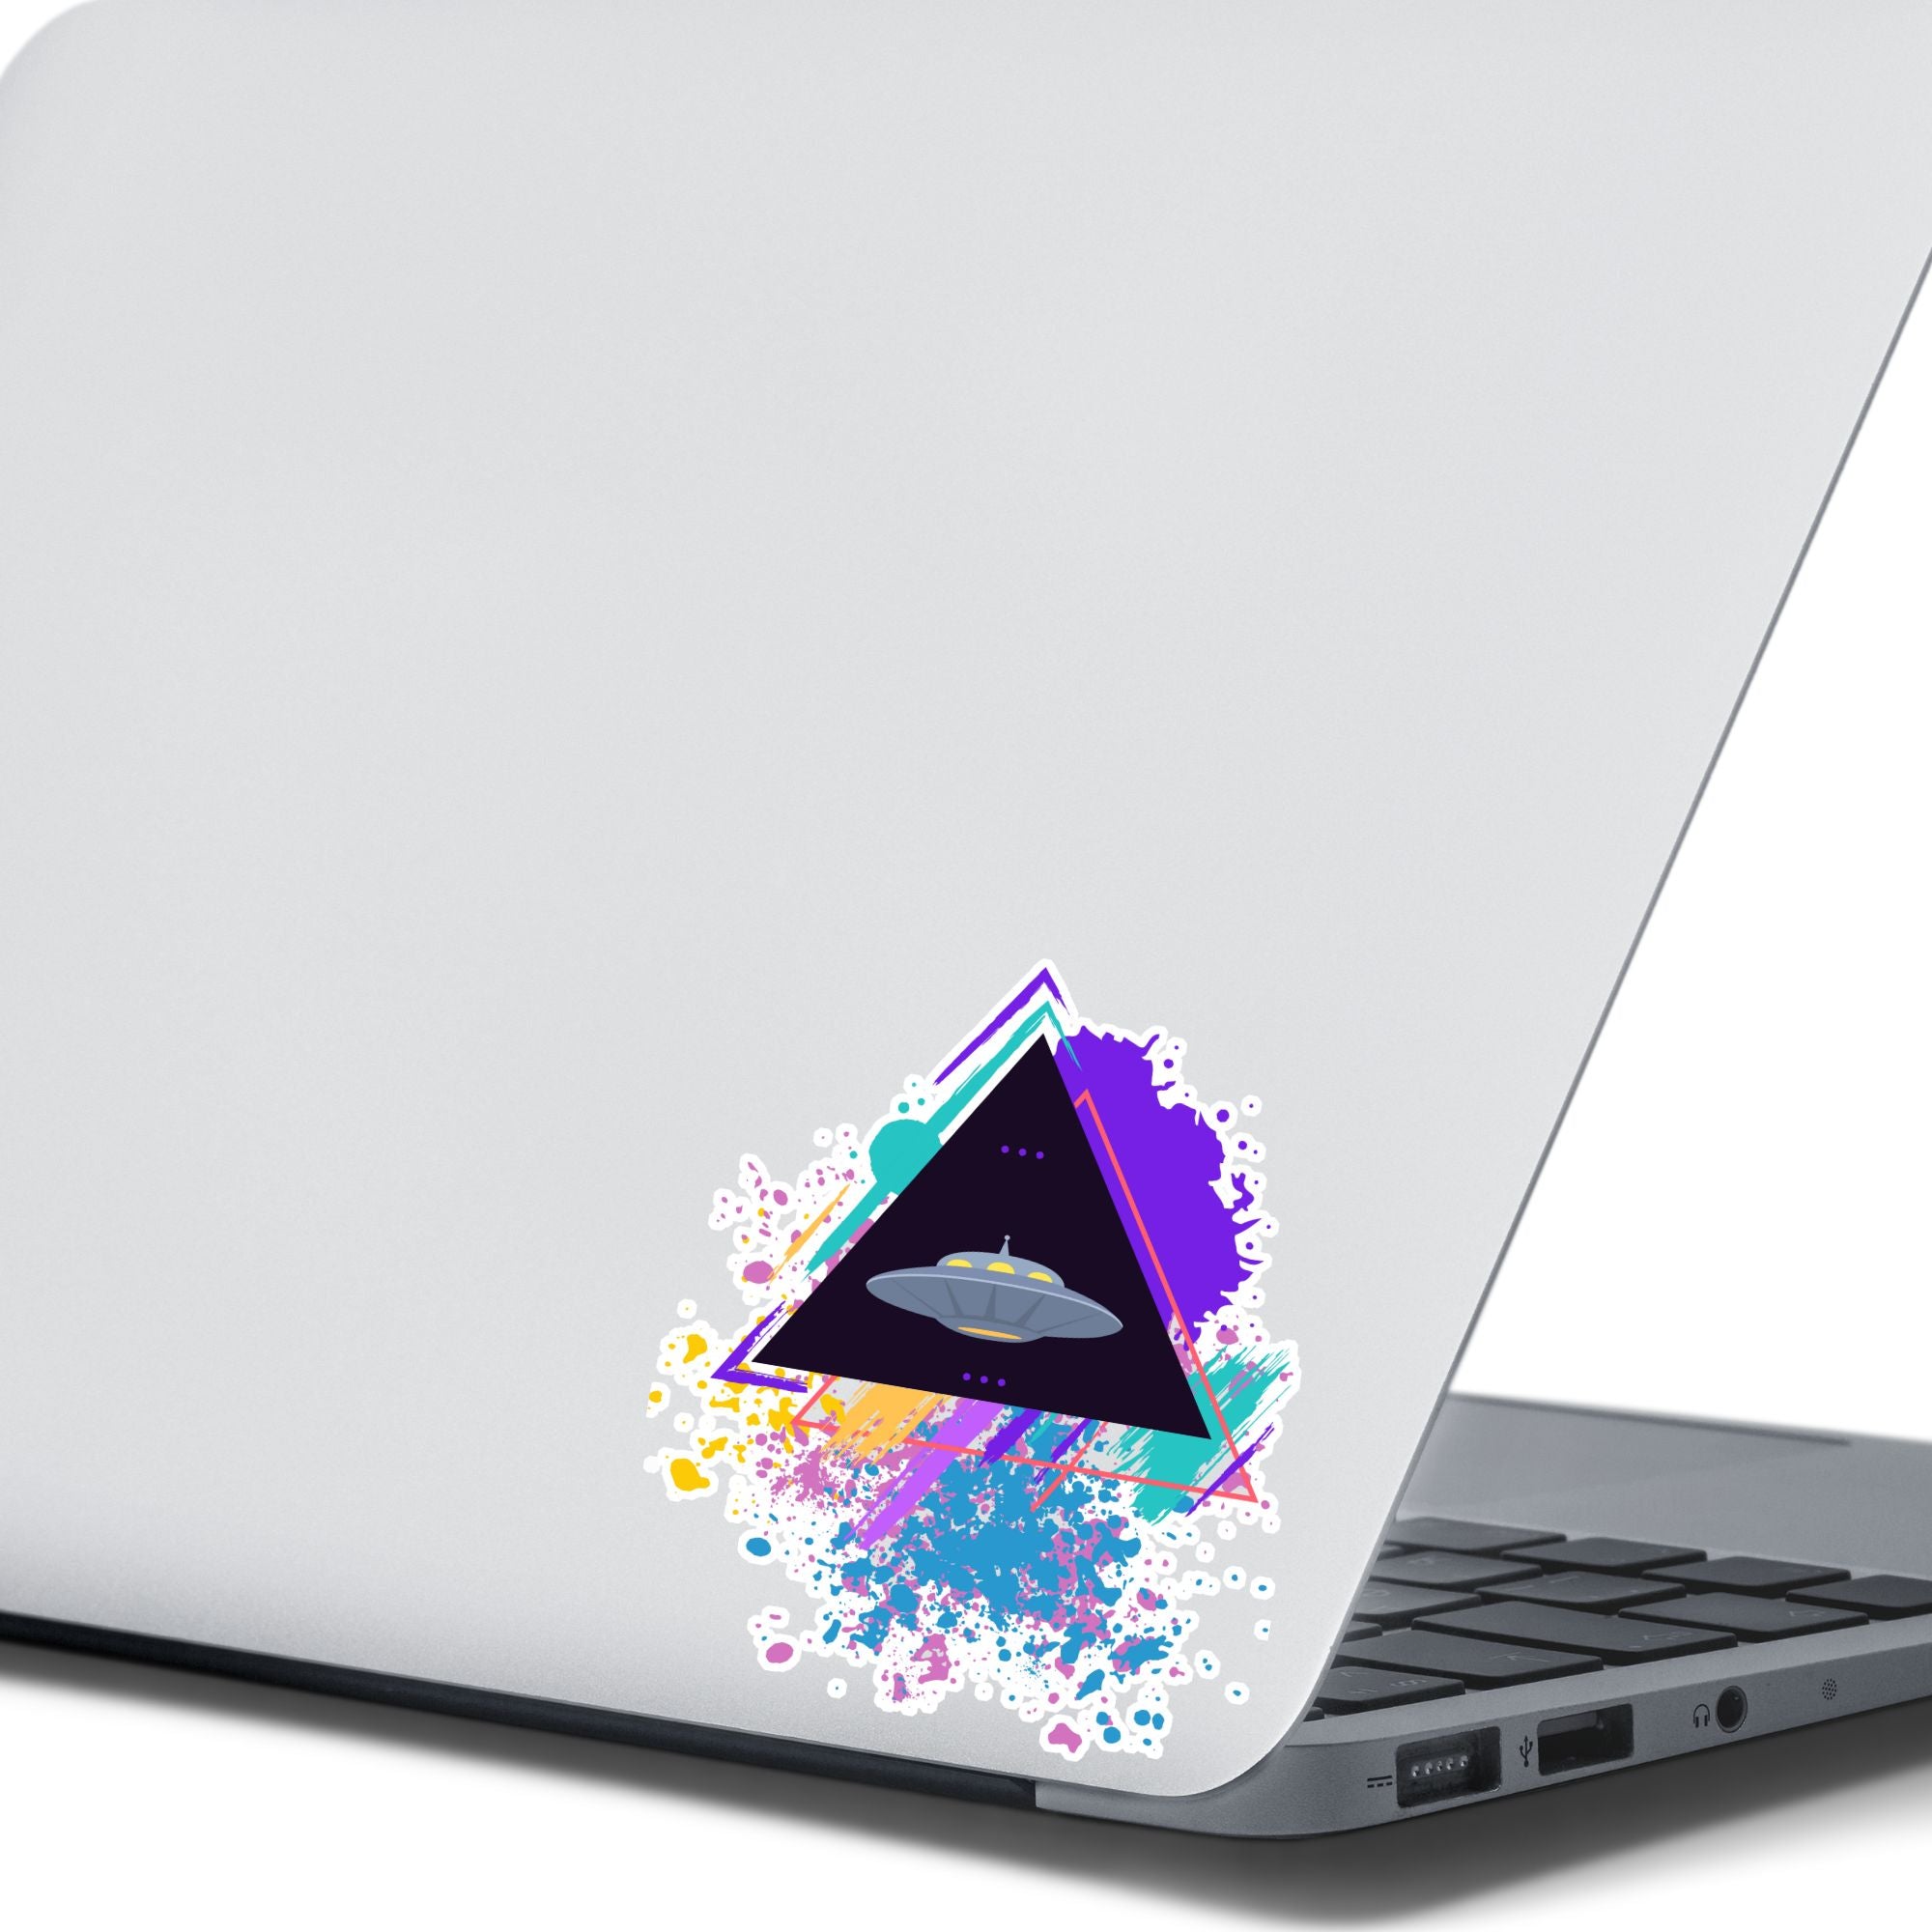 UFO alert! This individual die-cut sticker features an alien spaceship, UFO, on a black triangle background with pastel paint splatters behind. This image shows the UFO sticker on the back of an open laptop.